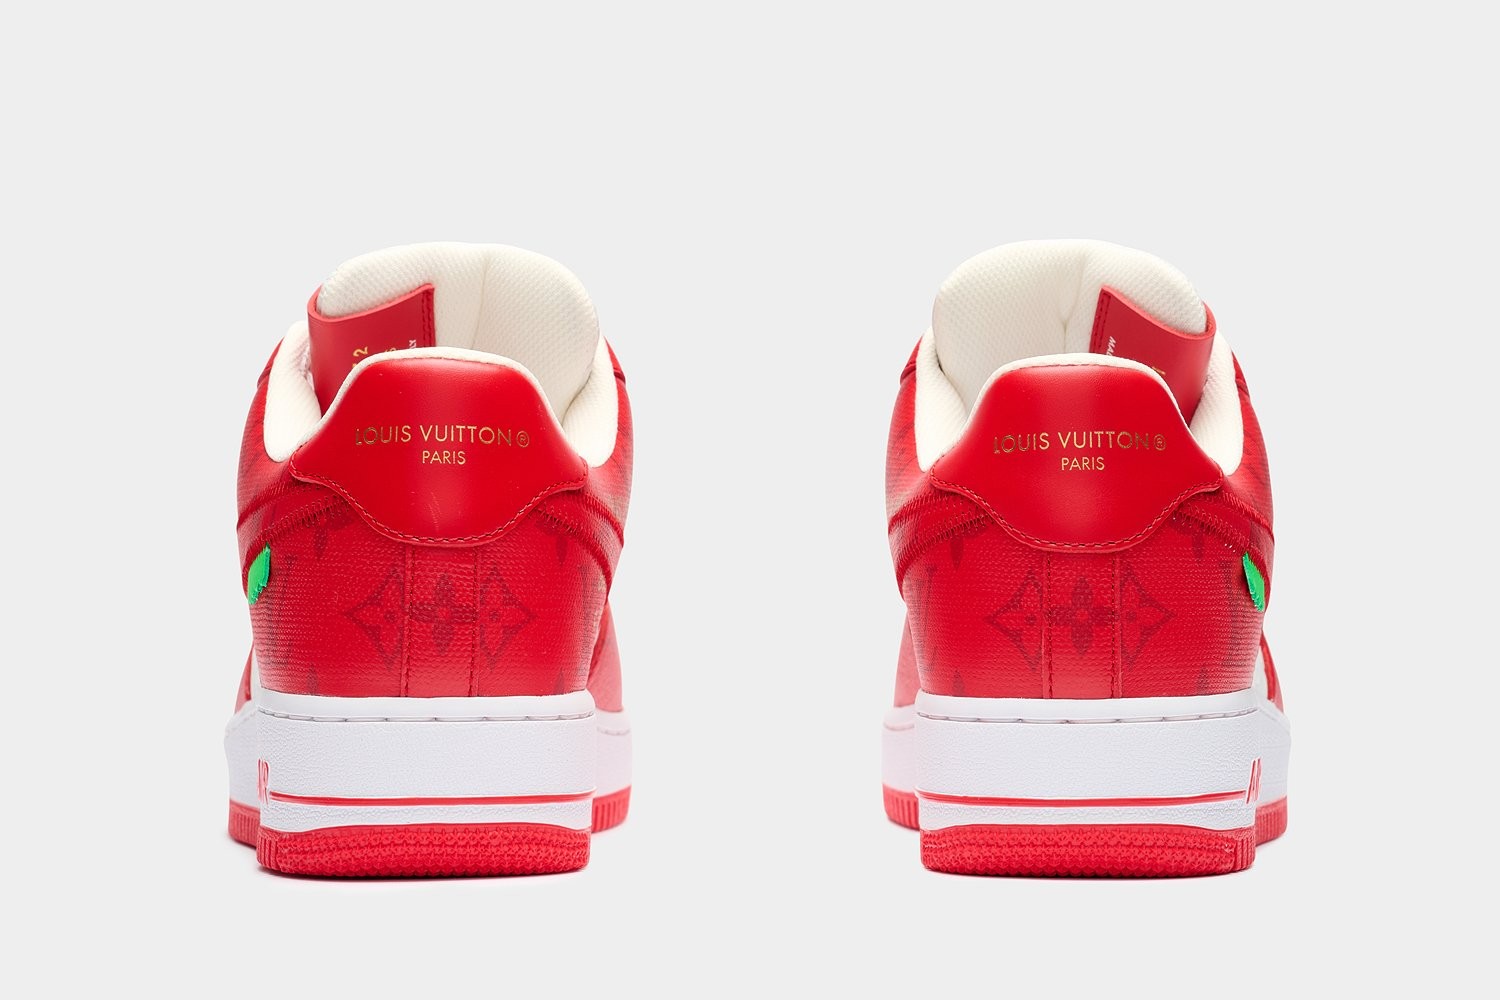 A complete series of nine Louis Vuitton and Nike “Air Force 1” by Virgil Abloh - Image 27 of 50